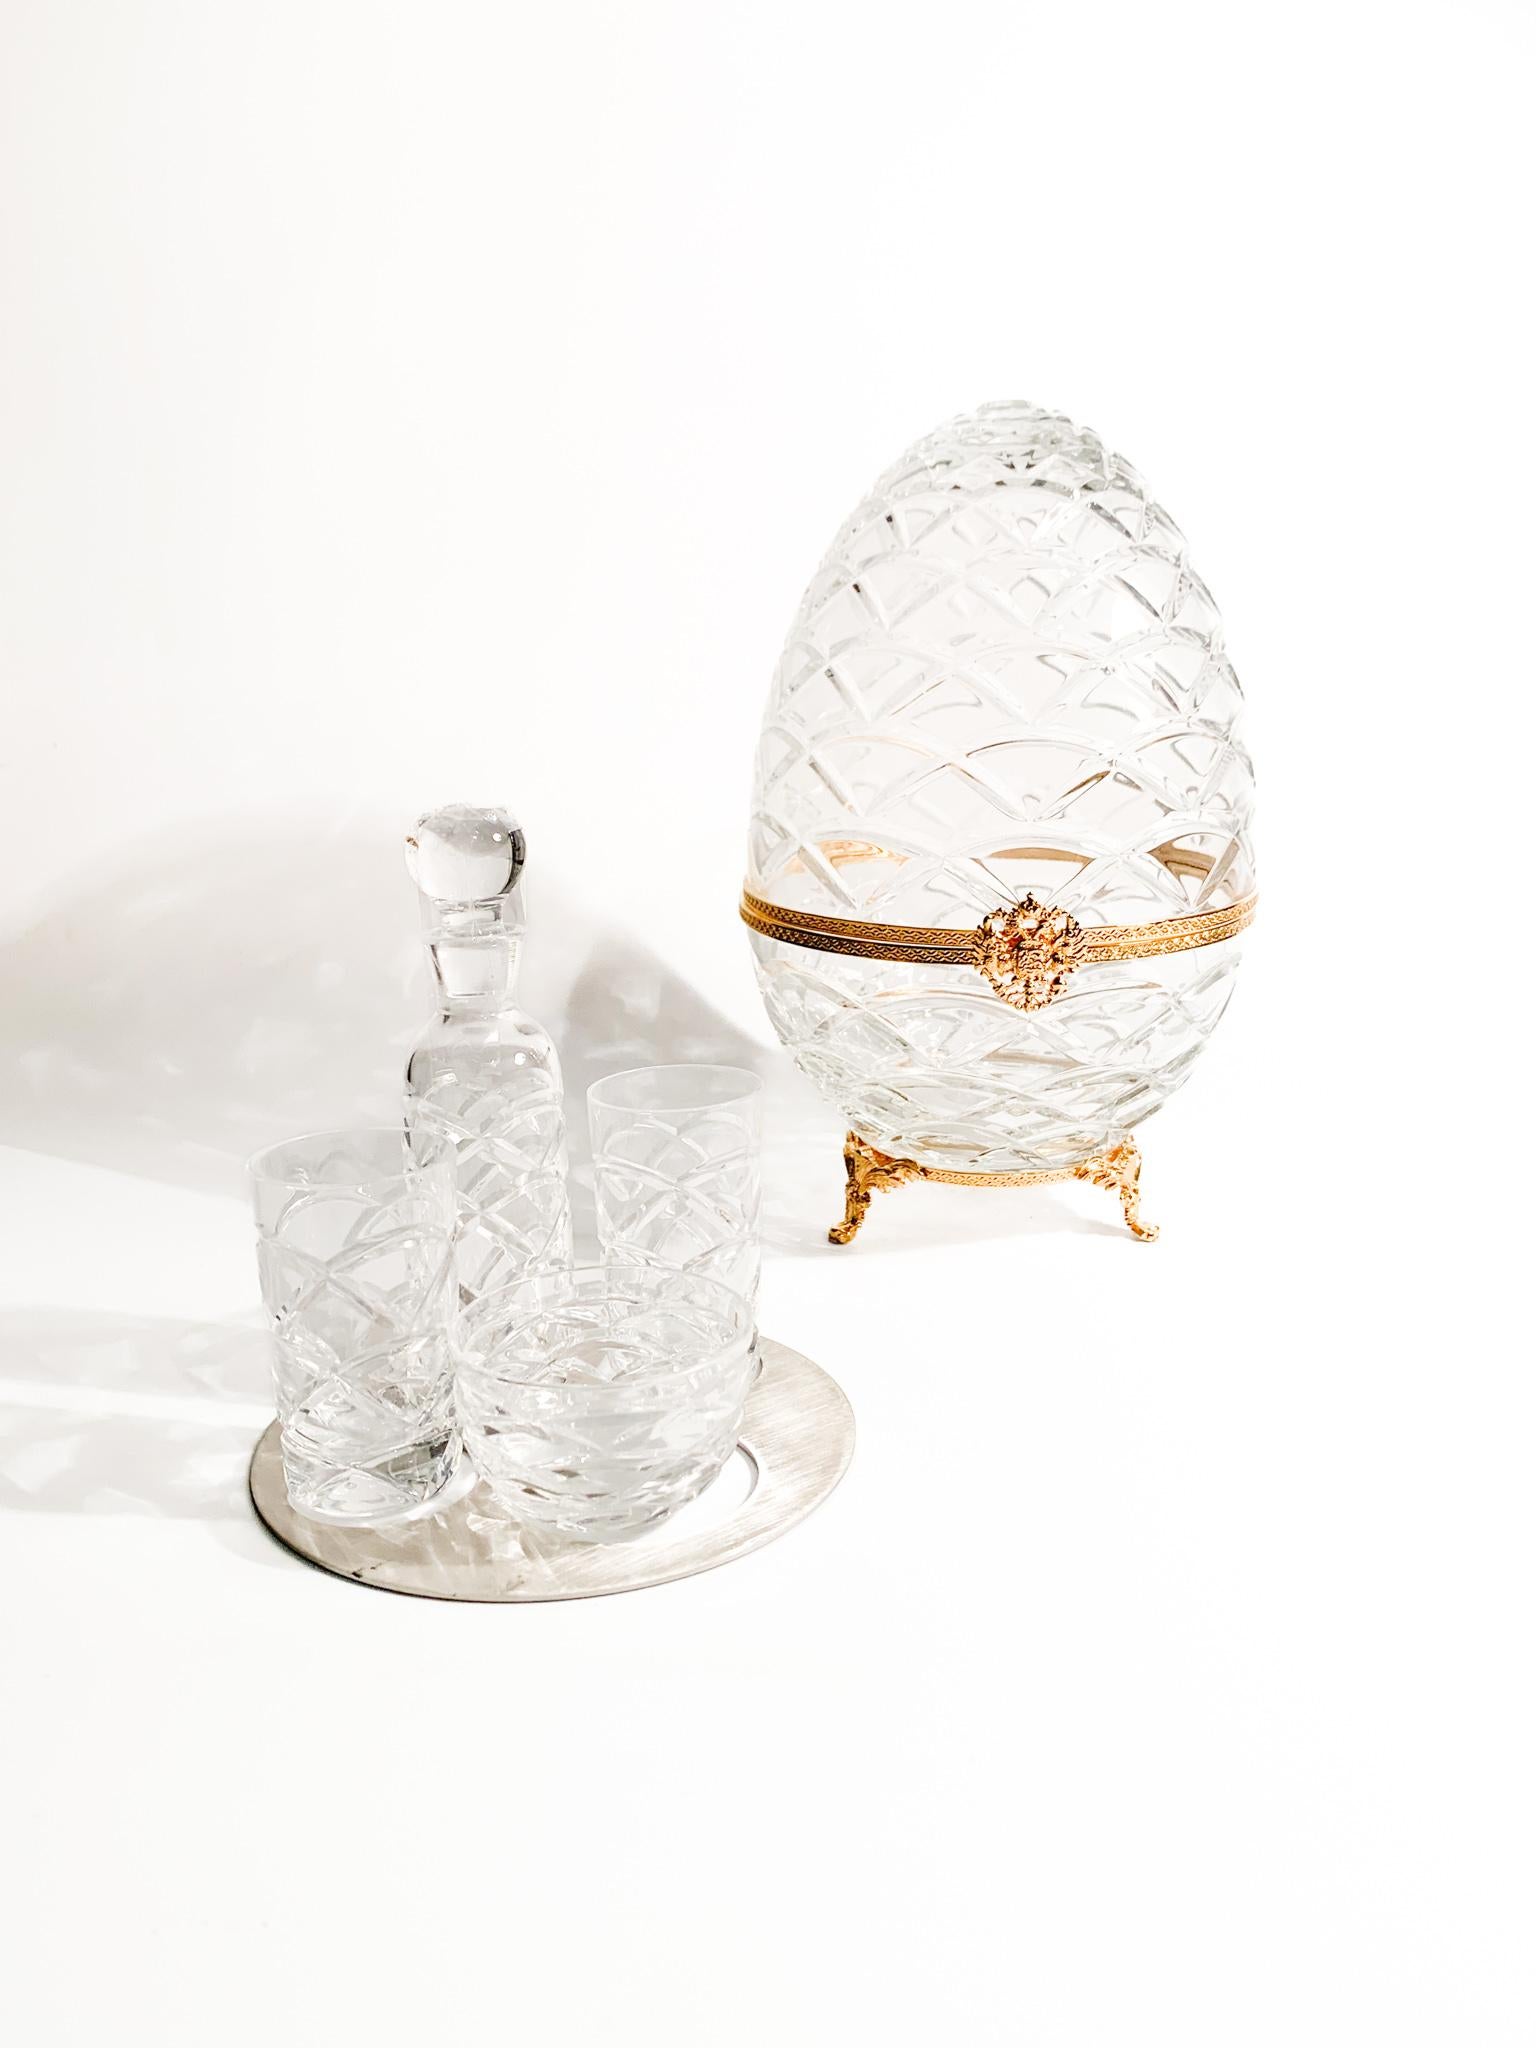 Imperial Vodka and Caviar Set in Fabergé Crystal. The set includes a new Faberge, two vodka glasses, a caviar bowl and a bottle. It includes a box.

Egg - Ø 15 cm h 25 cm 

Fabergé refers to the renowned House of Fabergé, a company of Russian